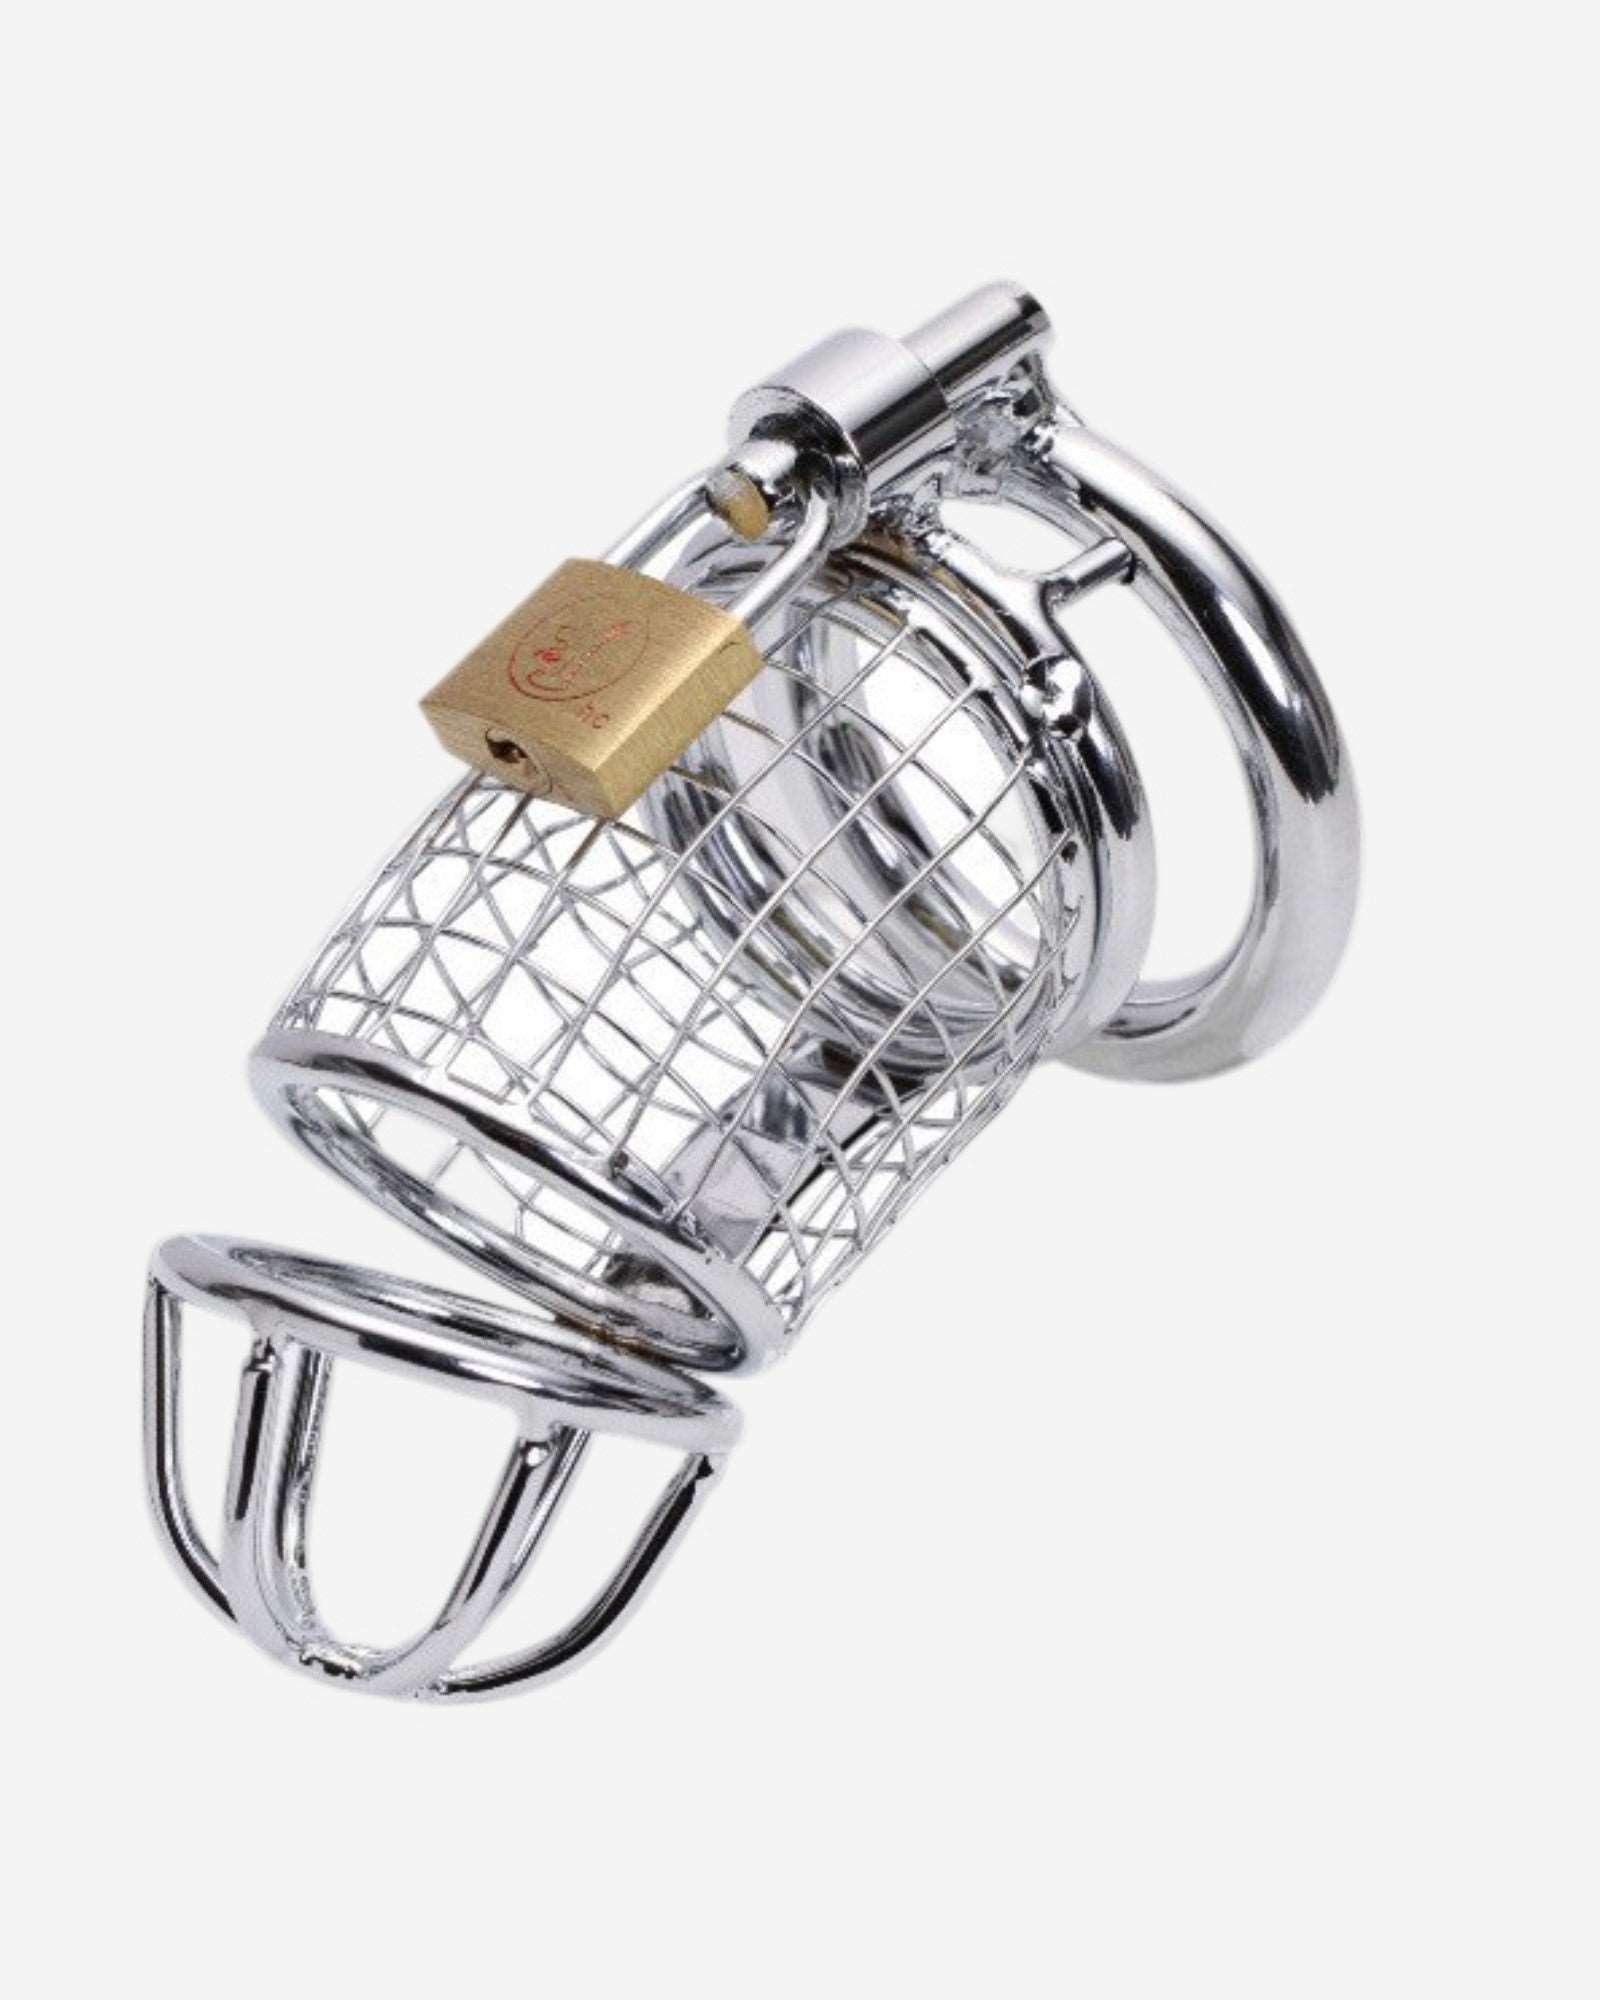 0 Big Male Chastity Metal Cock Cage